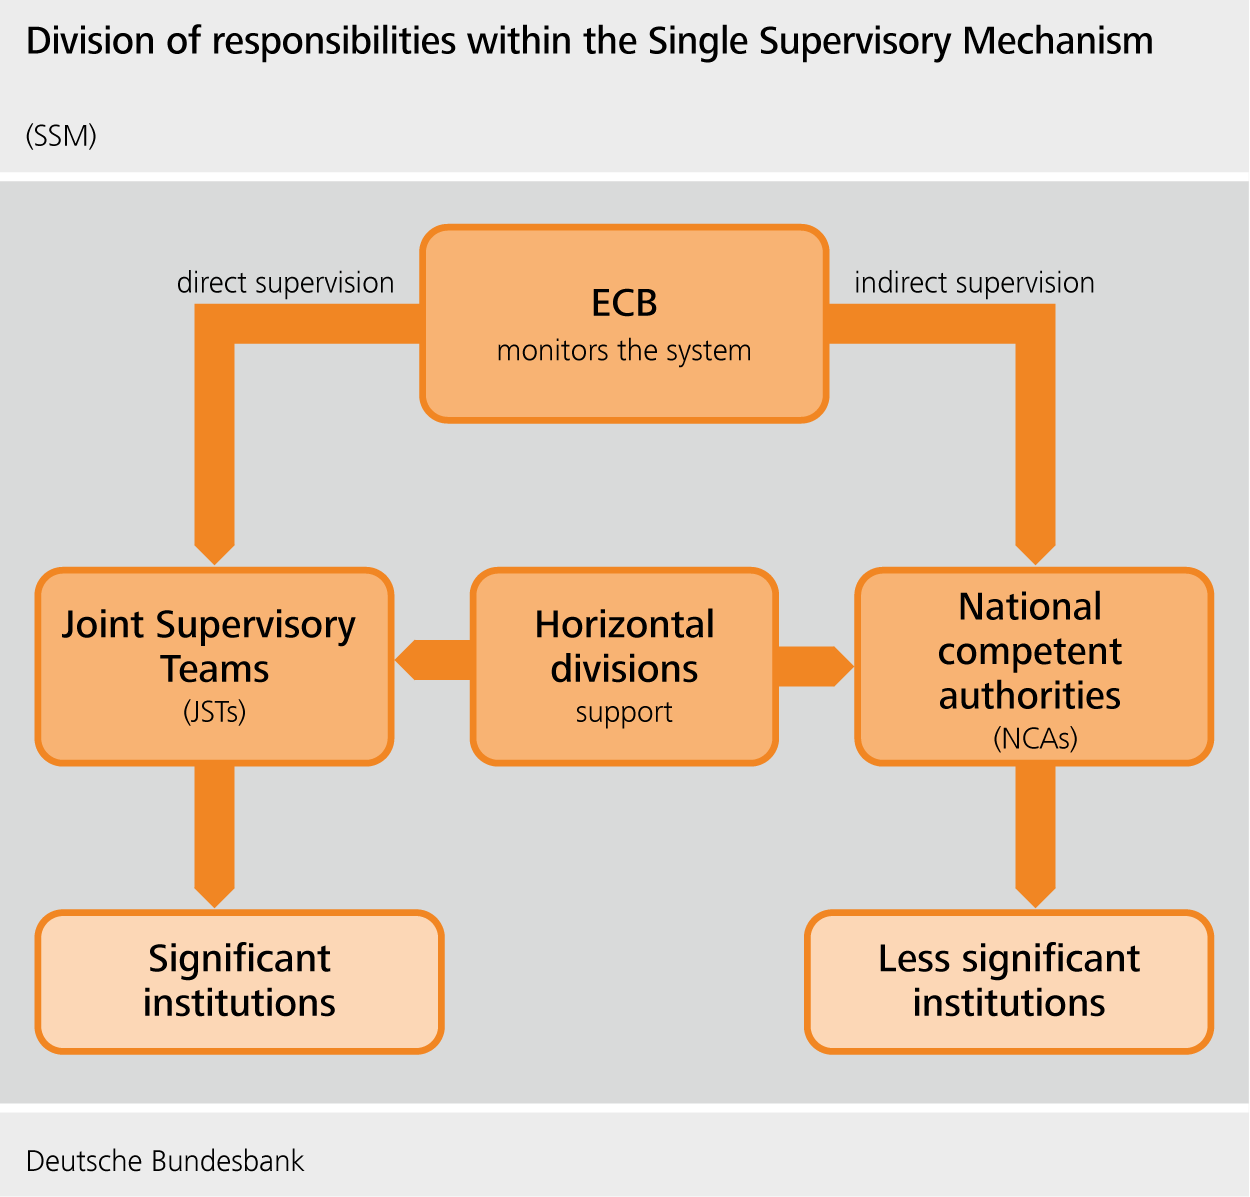 Allocation of tasks within the Single Supervisory Mechanism